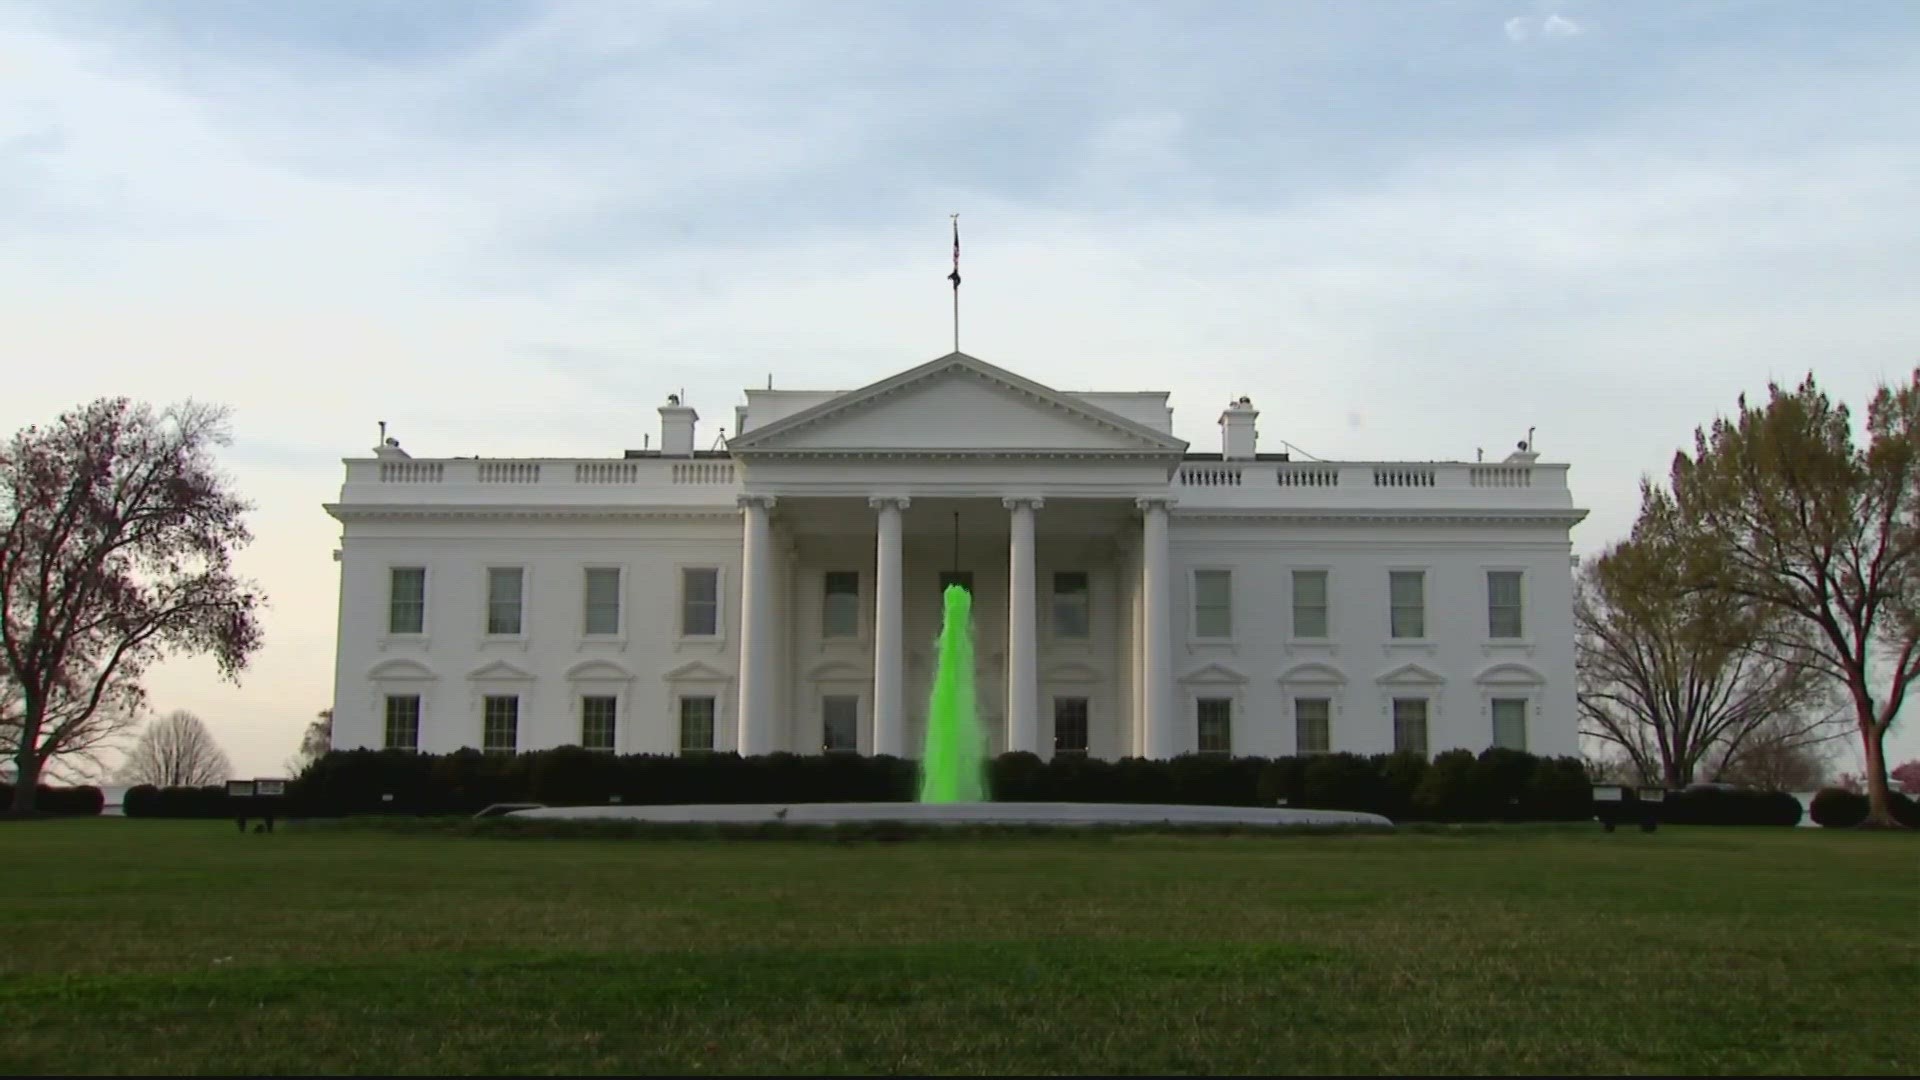 Biden turned the White House fountain into an electric green dream.